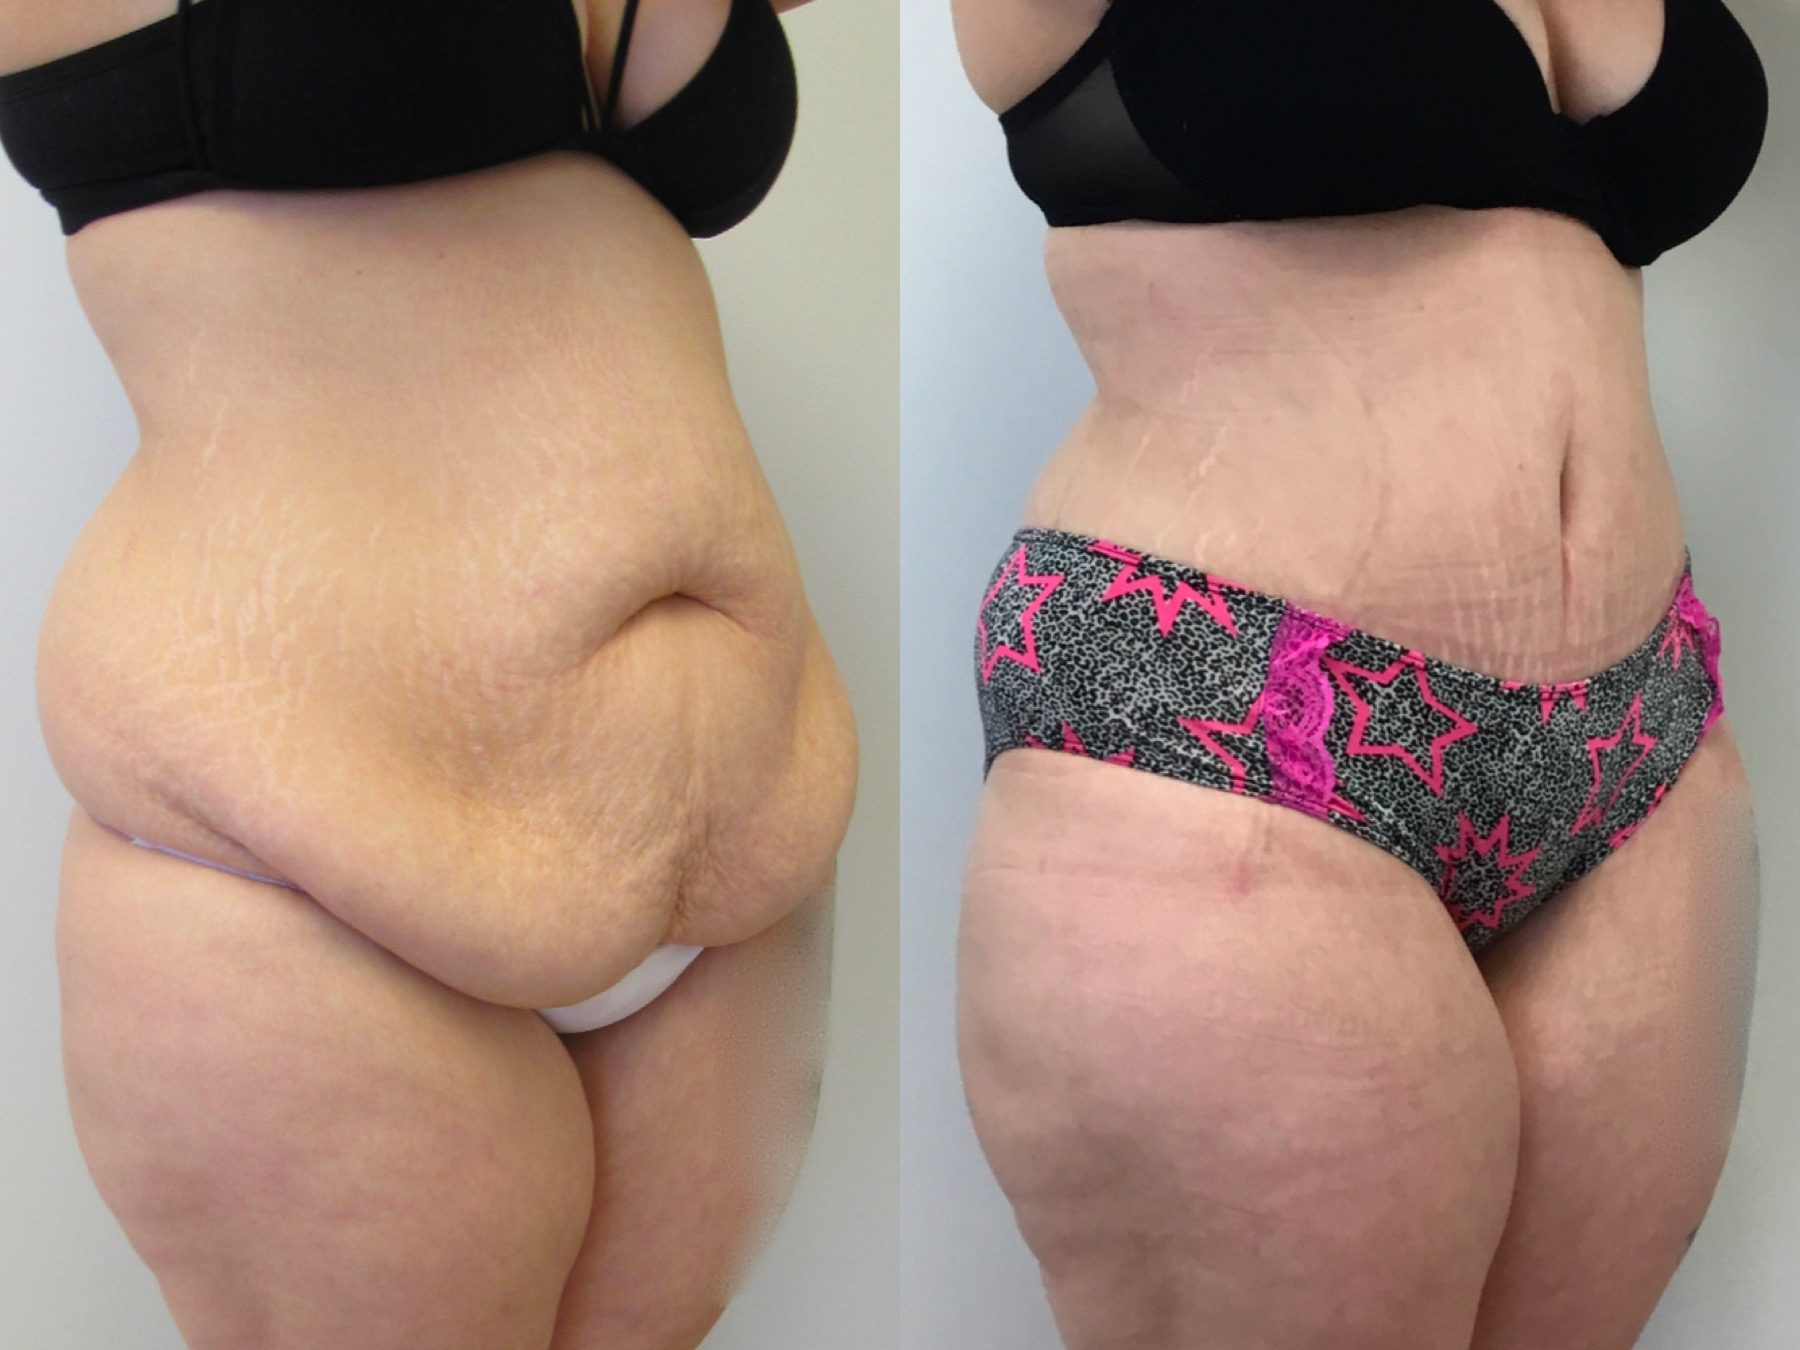 Before & After Abdominoplasty 24 Photos